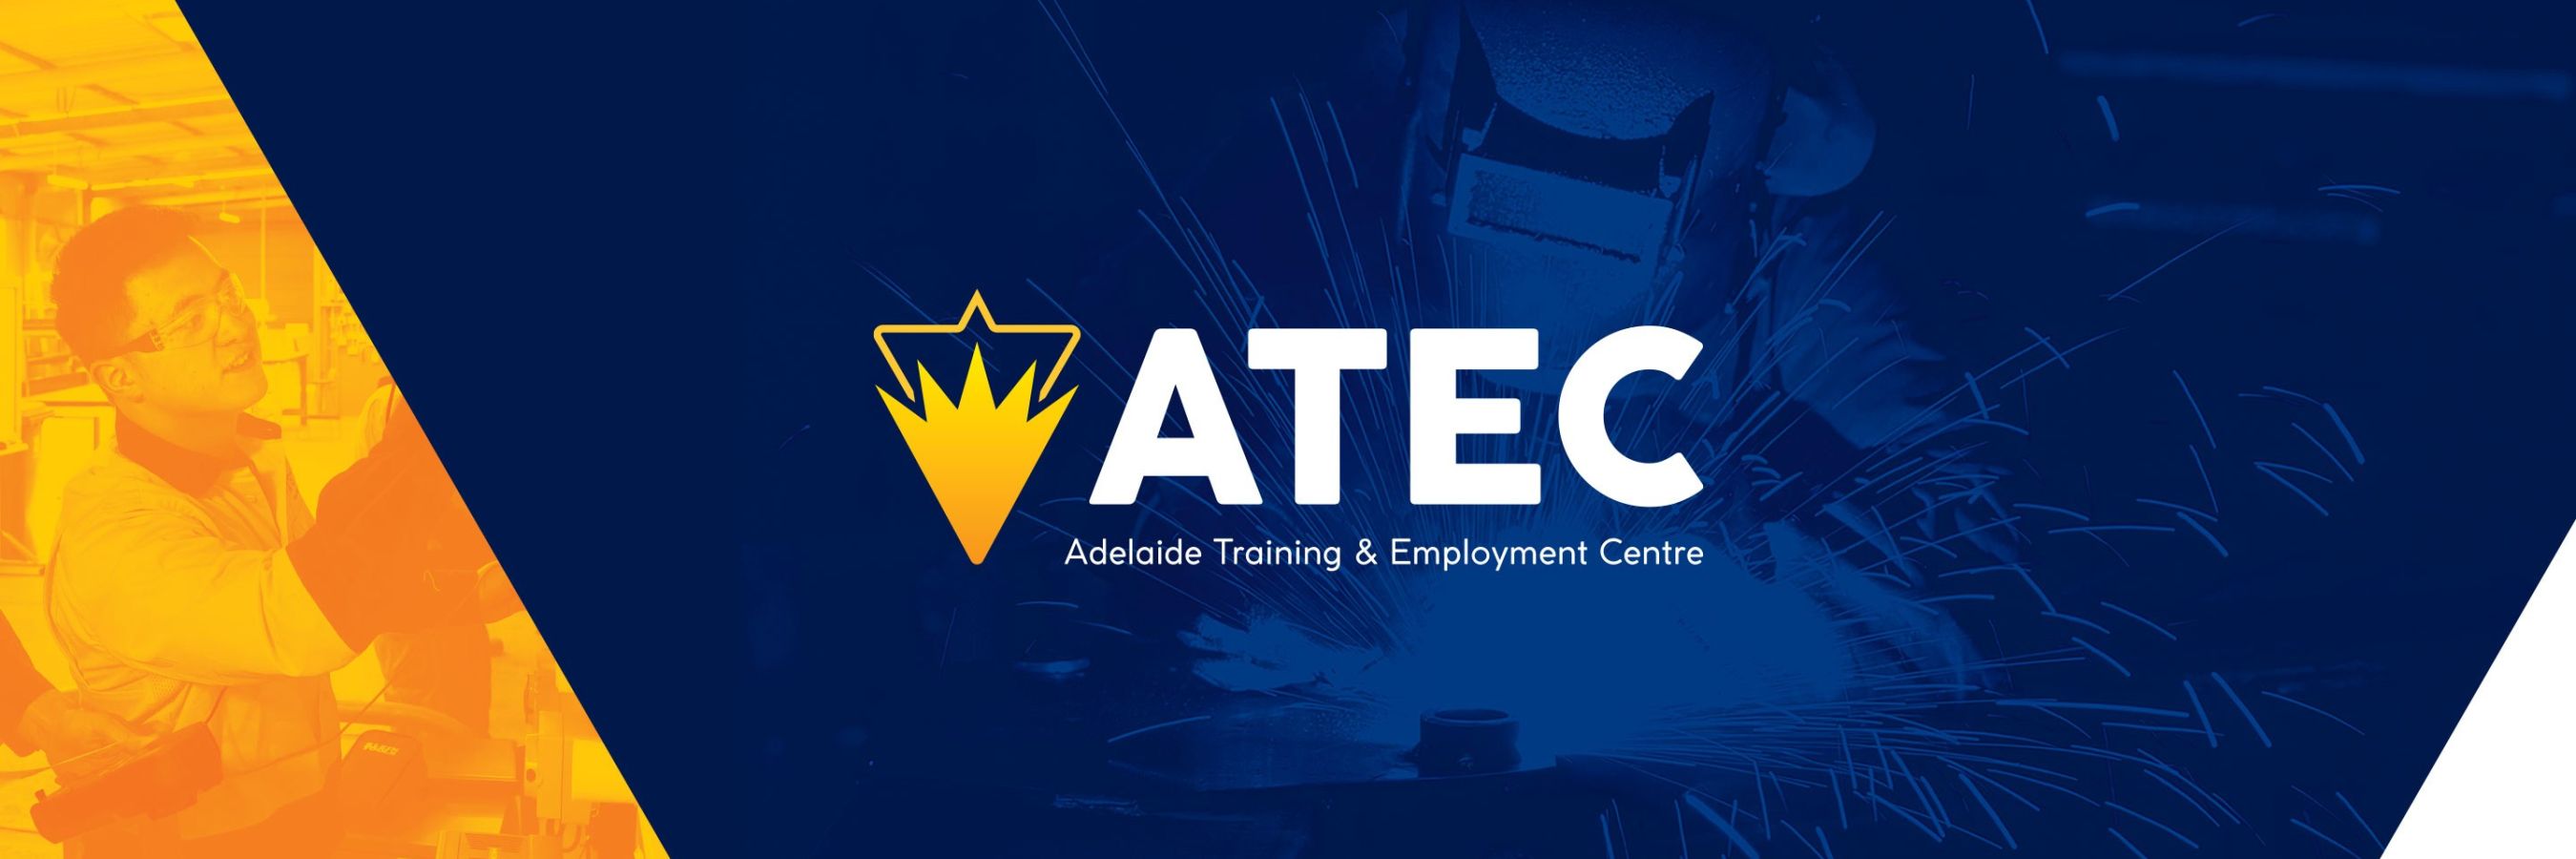 Adelaide Training and Employment Centre logo